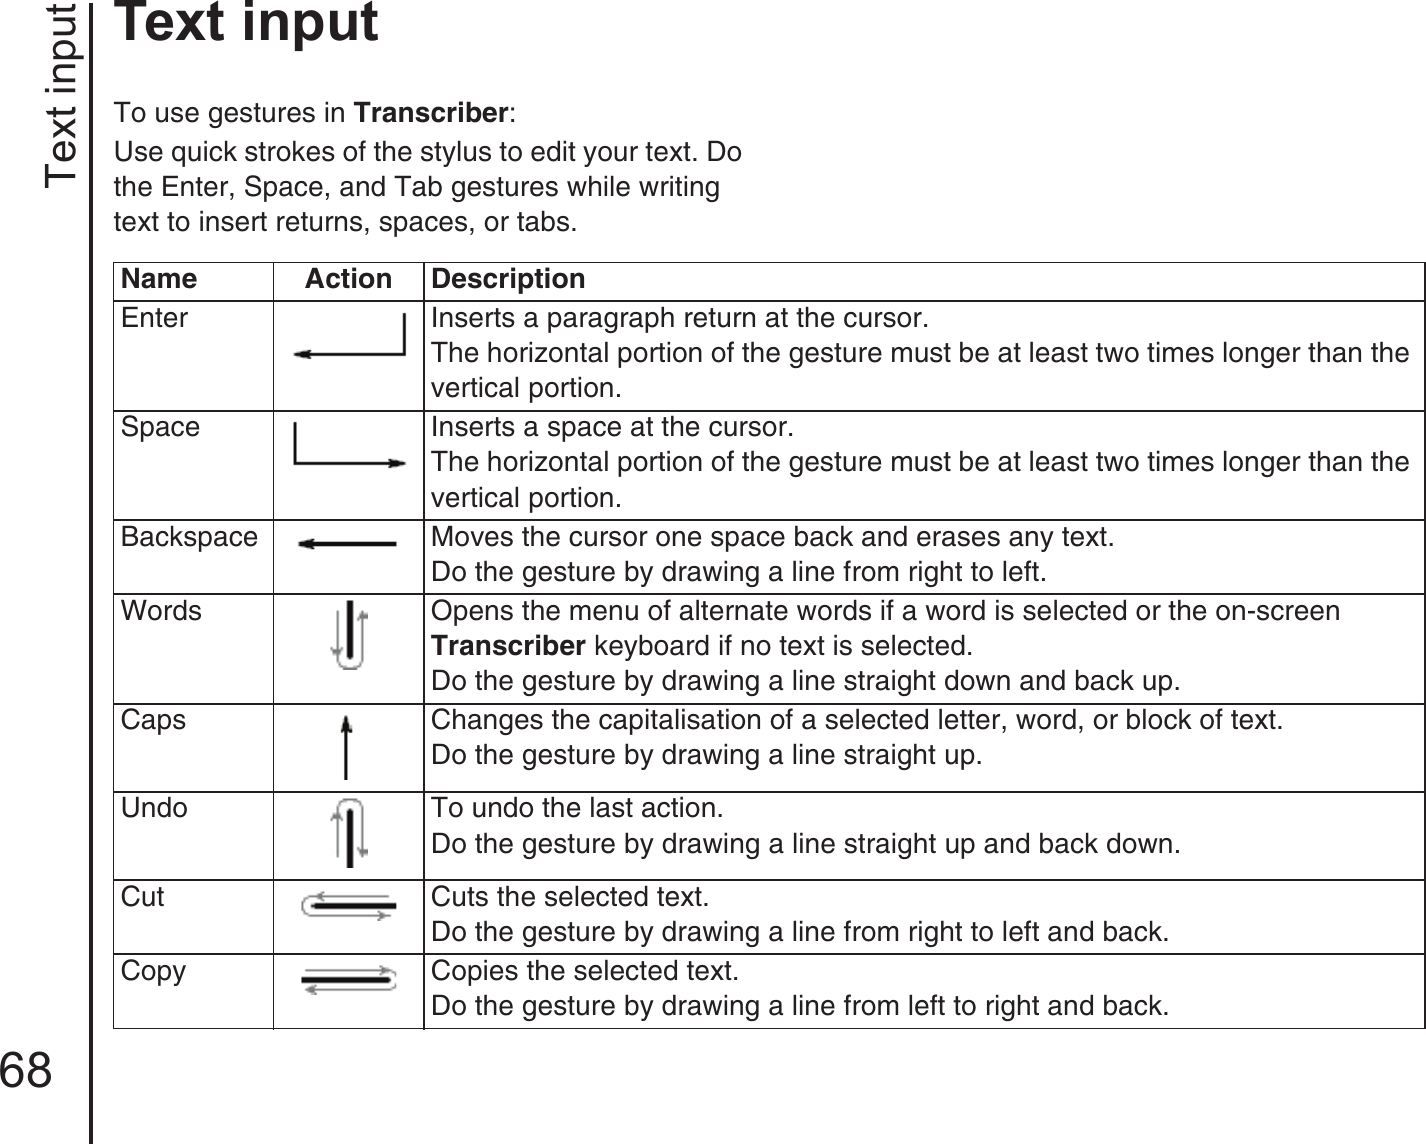 Text input68Text inputTo use gestures in Transcriber:Use quick strokes of the stylus to edit your text. Do the Enter, Space, and Tab gestures while writing text to insert returns, spaces, or tabs.Name Action DescriptionEnter Inserts a paragraph return at the cursor.The horizontal portion of the gesture must be at least two times longer than the vertical portion.Space Inserts a space at the cursor.The horizontal portion of the gesture must be at least two times longer than the vertical portion.Backspace Moves the cursor one space back and erases any text.Do the gesture by drawing a line from right to left.Words Opens the menu of alternate words if a word is selected or the on-screen Transcriber keyboard if no text is selected.Do the gesture by drawing a line straight down and back up.Caps Changes the capitalisation of a selected letter, word, or block of text.Do the gesture by drawing a line straight up.Undo To undo the last action.Do the gesture by drawing a line straight up and back down.Cut Cuts the selected text.Do the gesture by drawing a line from right to left and back.Copy Copies the selected text.Do the gesture by drawing a line from left to right and back.